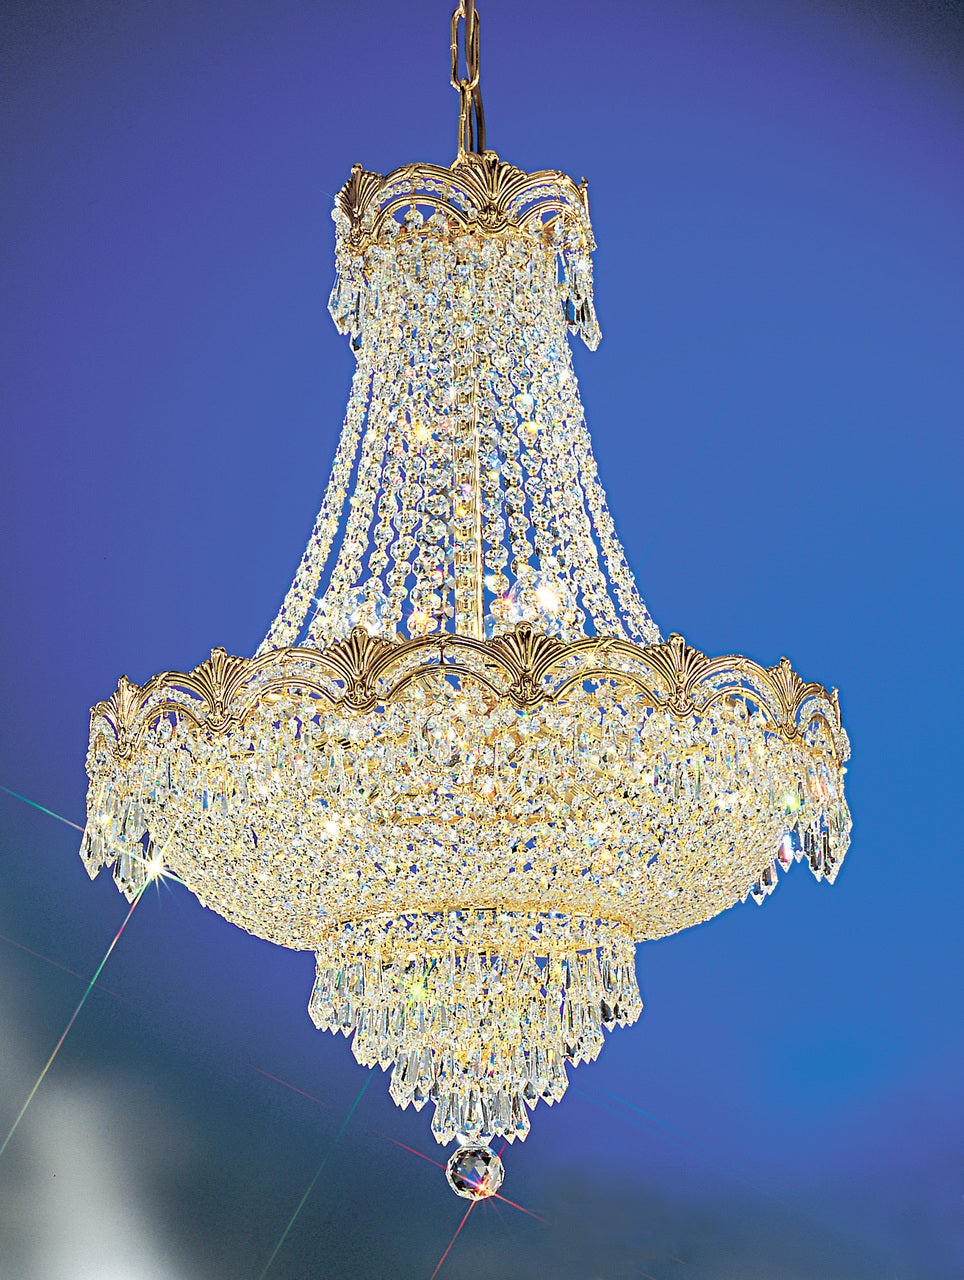 Classic Lighting 1855 G CP Regency II Crystal Chandelier in 24k Gold (Imported from Spain)